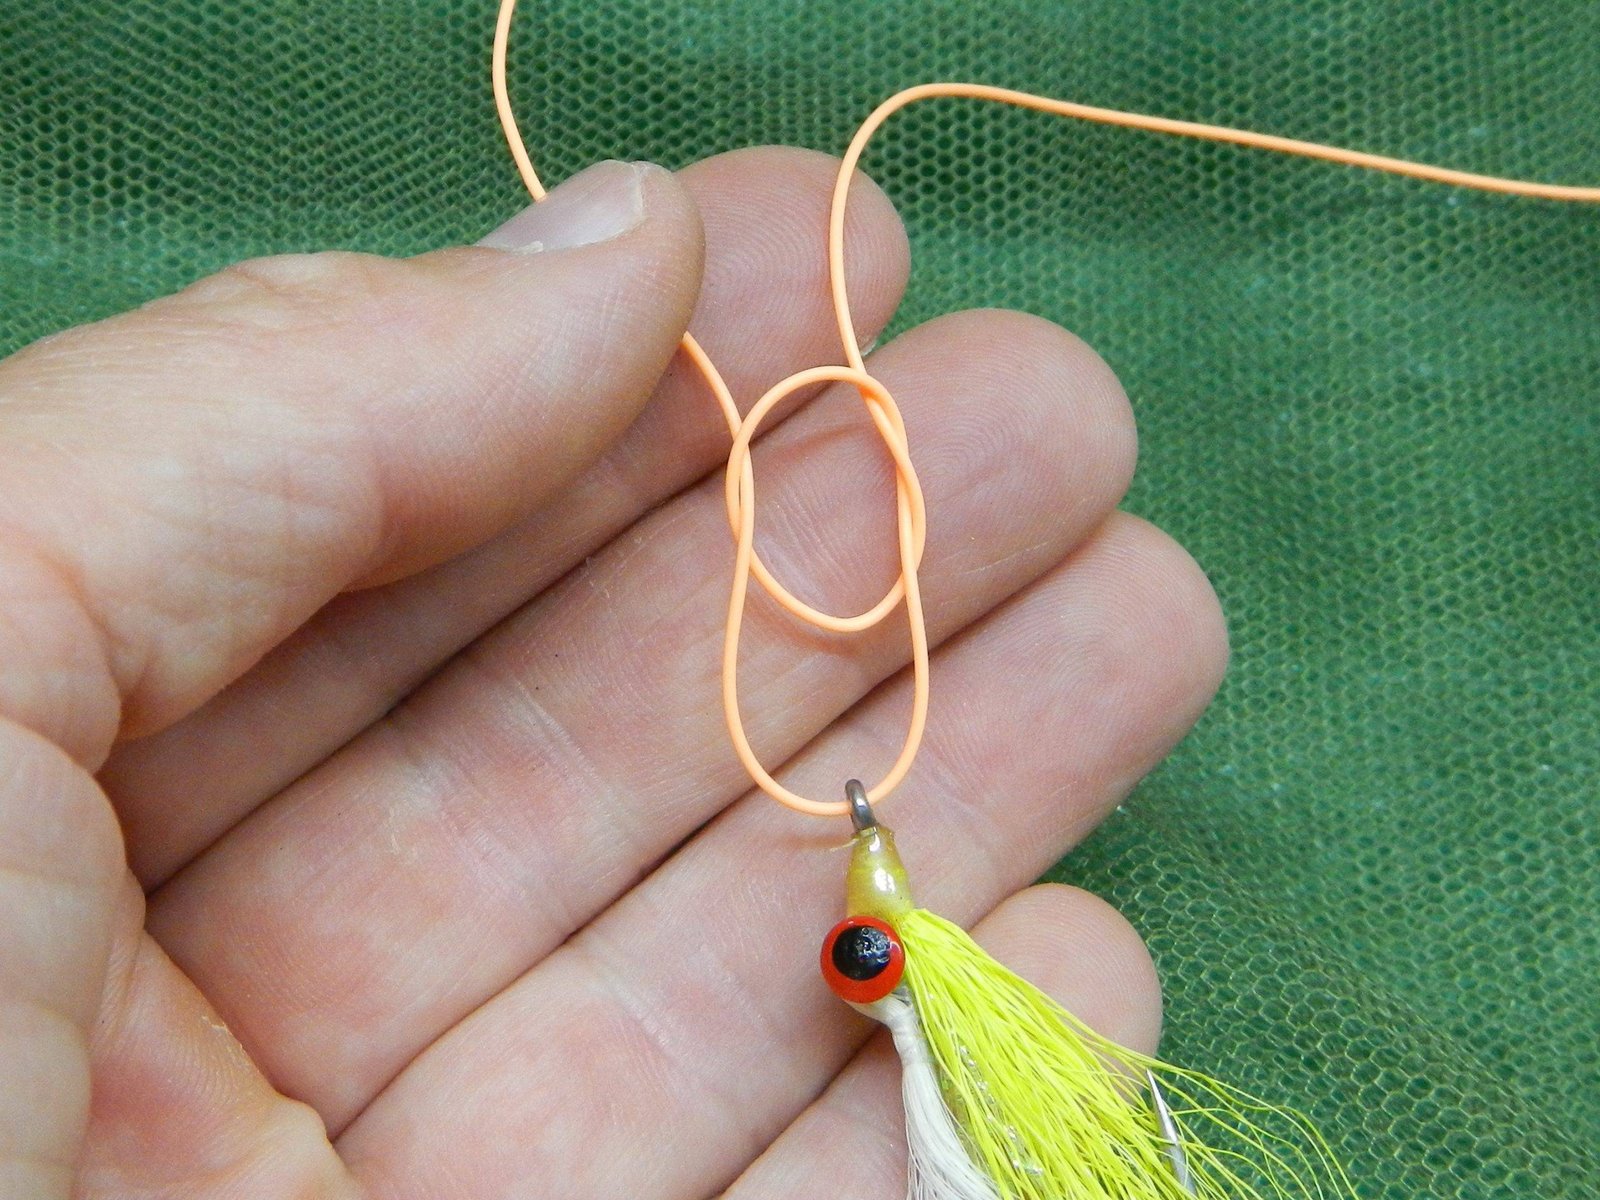 New Fly Guy - Tips on Tippet - CatchGuide Outdoors